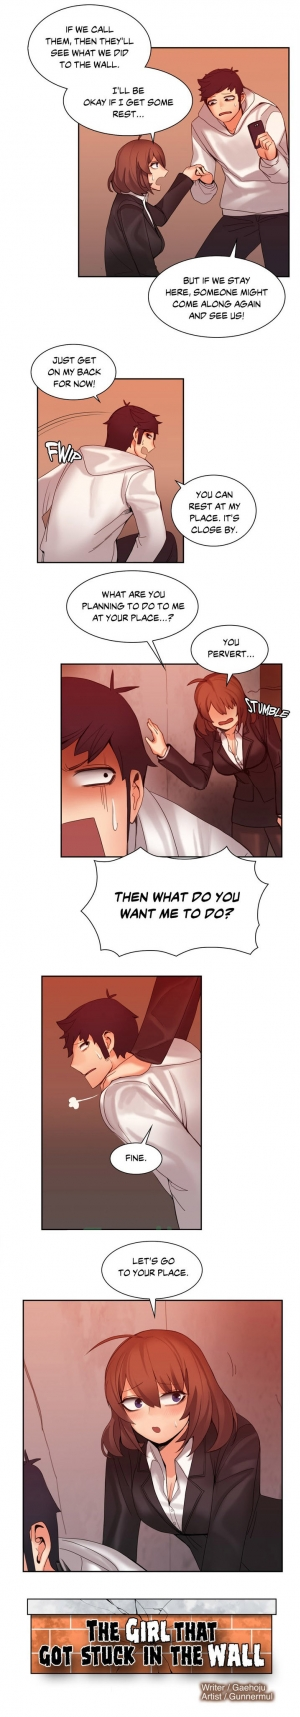 [Gaehoju, Gunnermul] The Girl That Got Stuck in the Wall Ch.11/11 [COMPLETED] [English] [Hentai Universe] - Page 119